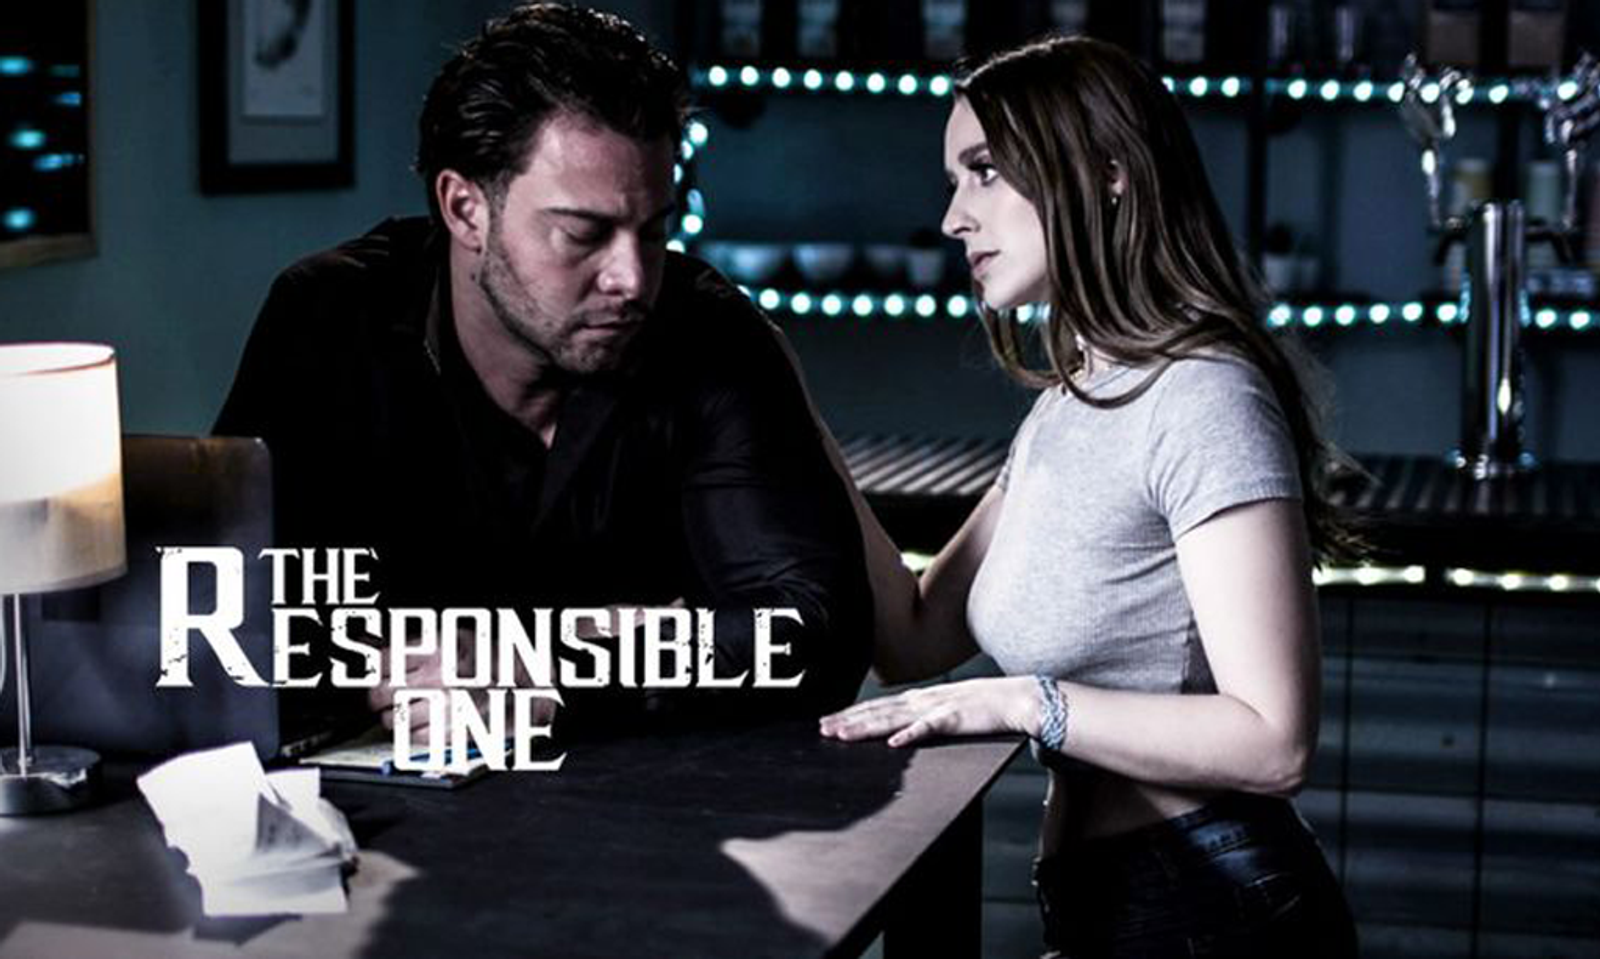 Seth Gamble, Laney Grey Essay Pure Taboo's 'The Responsible One'